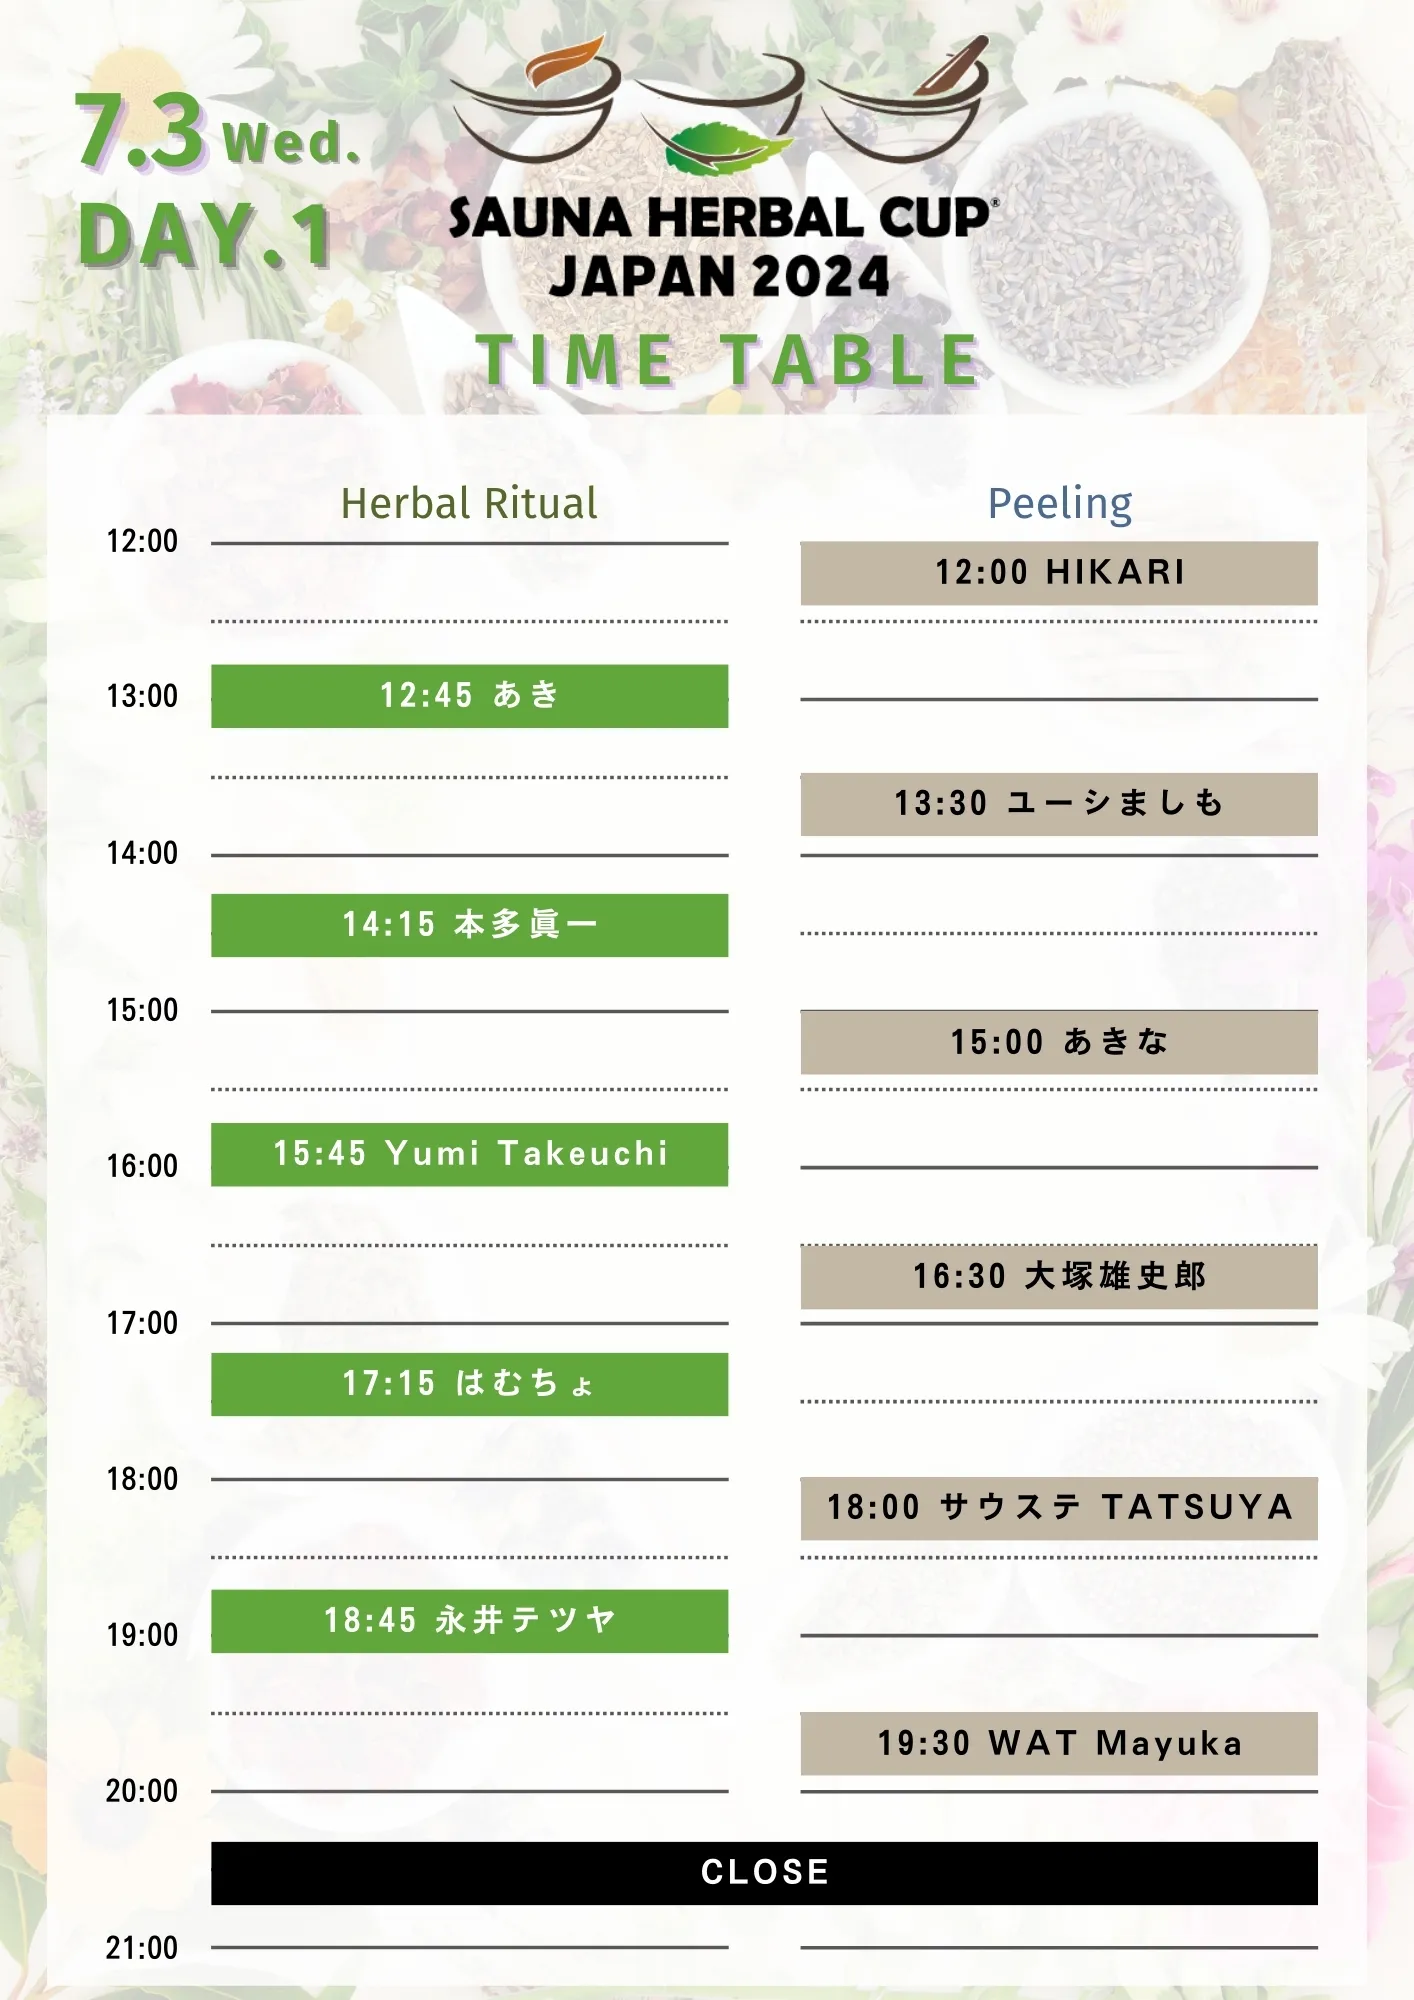 TIME TABLE【DAY.1】